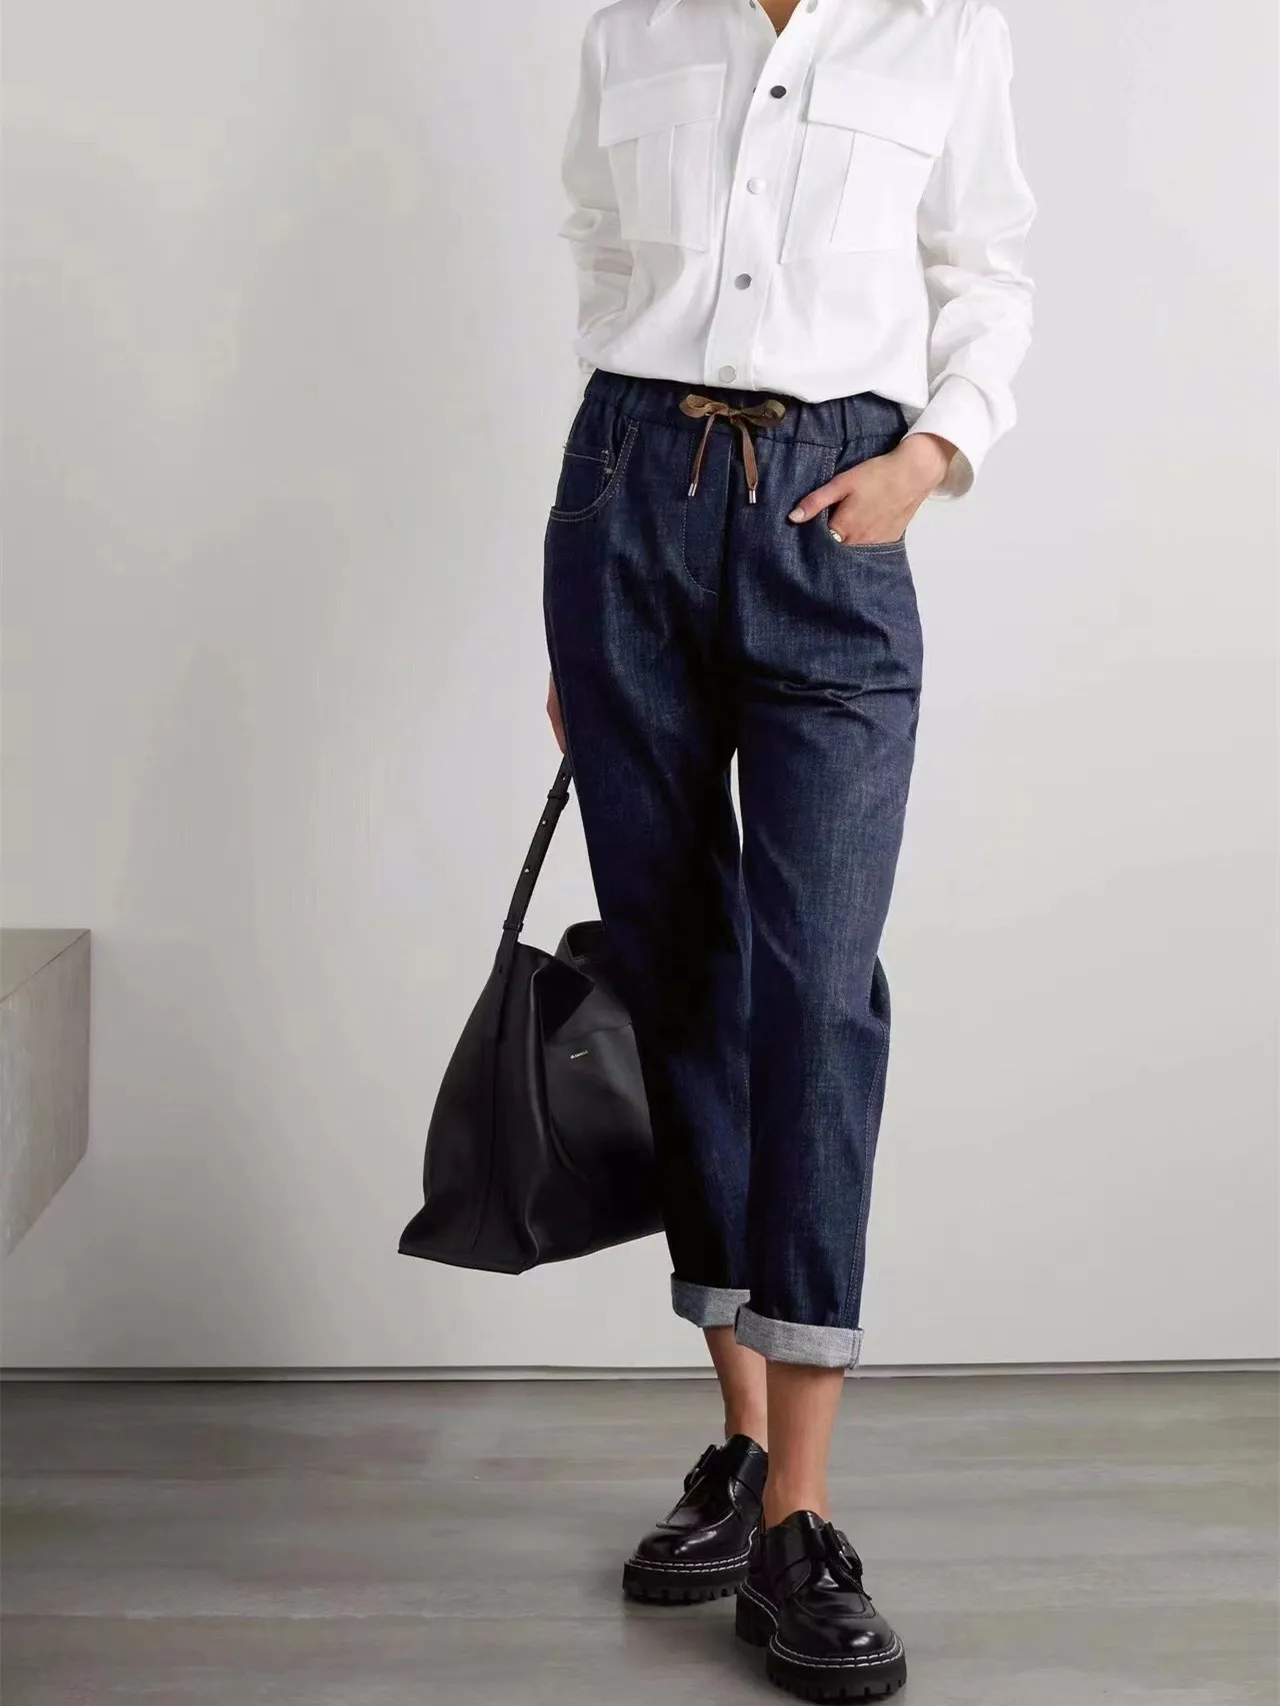 Spring Summer Women Casual Jeans Elastic Waist Lace-up New Fashion Female Denim Trousers with Pockets